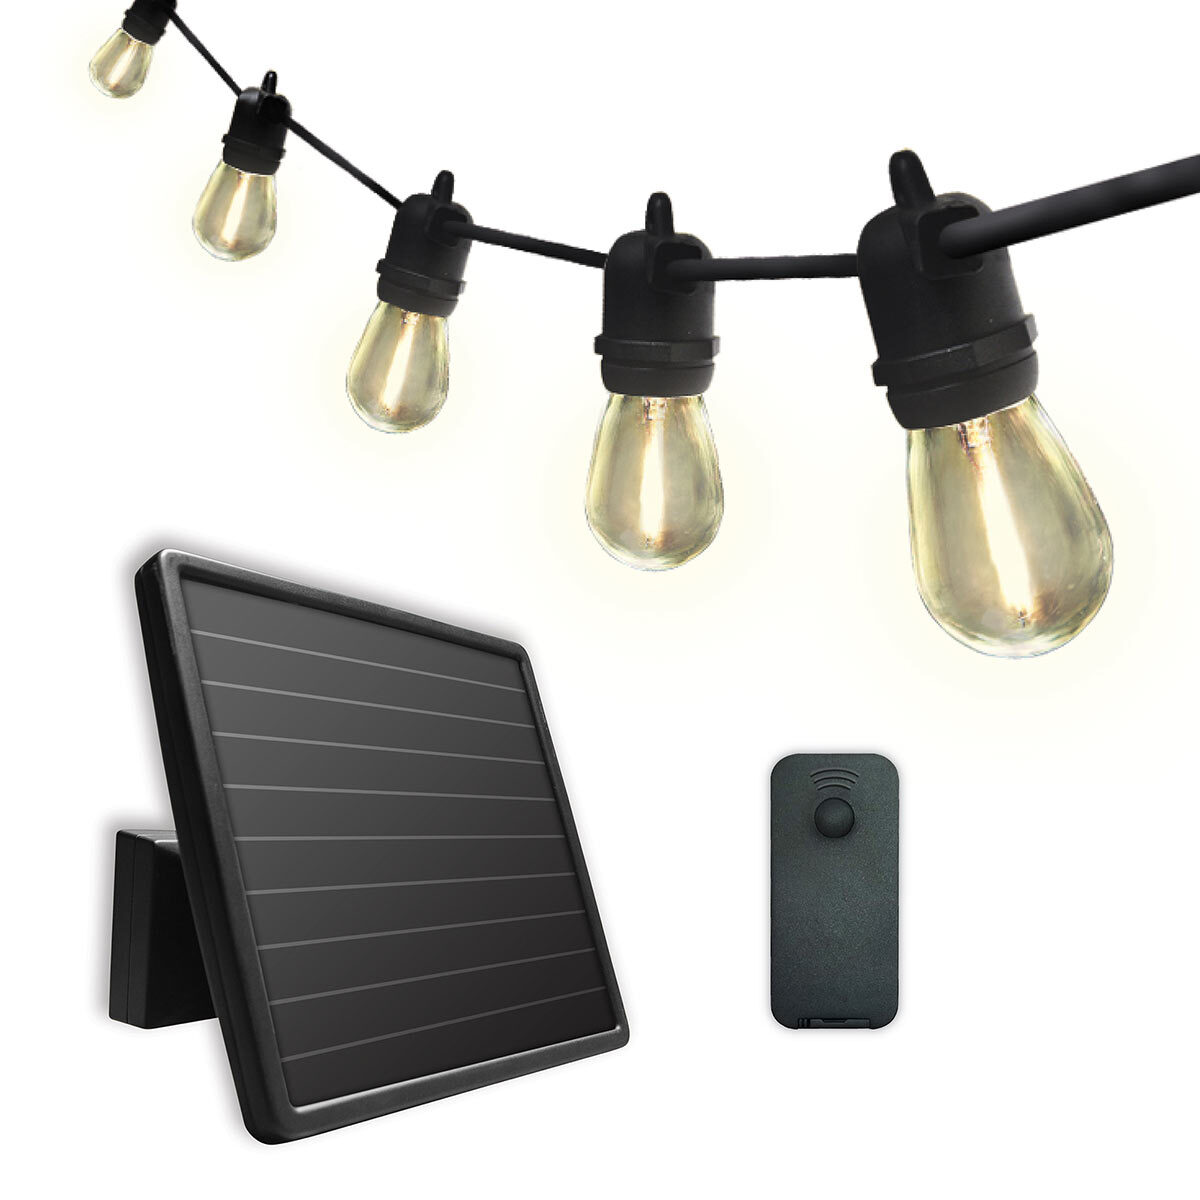 Sunforce Solar String Lights with Remote Control Costco UK